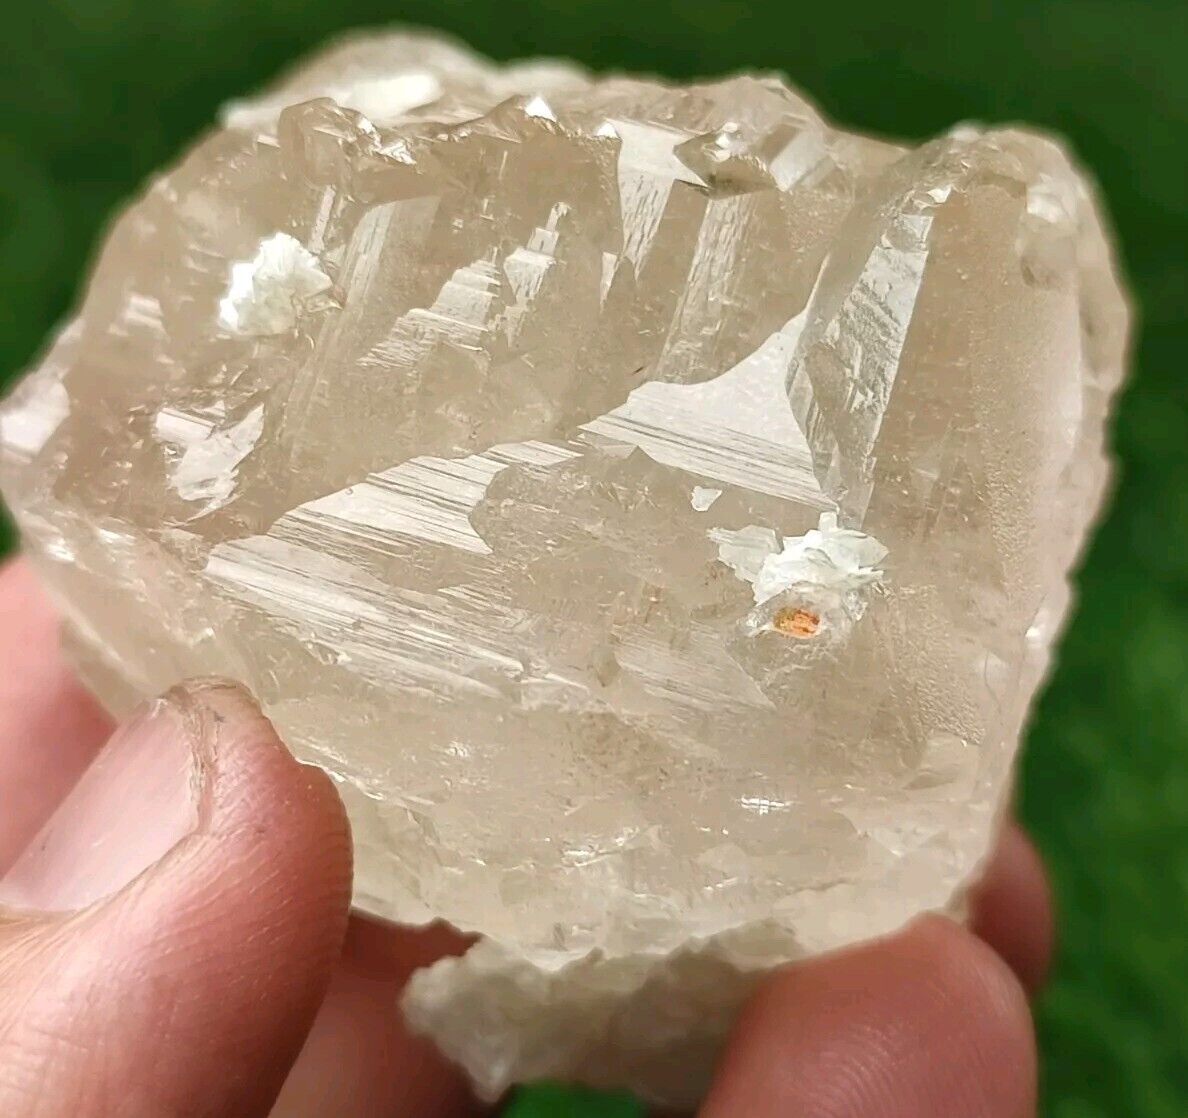 Topaz Etched Large Crystal, With Muscovite Mica Having Unique Multi Terminations